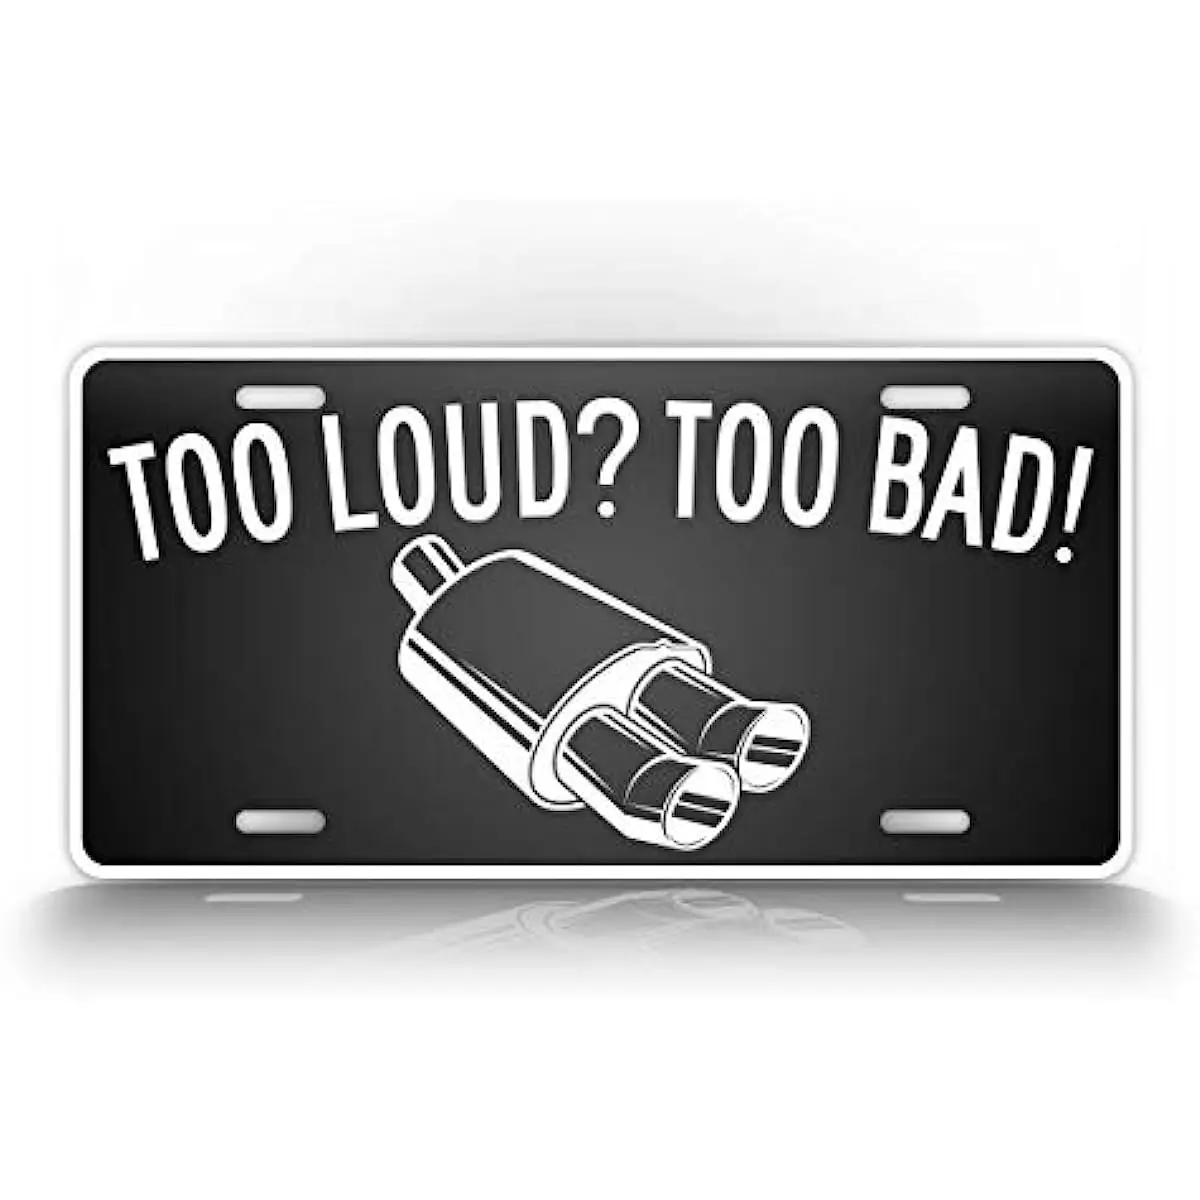 

SignsAndTagsOnline Funny Rude Muffler License Plate Too Loud Too Bad! Auto Tag-Wall Decoration Metal Wall Sign